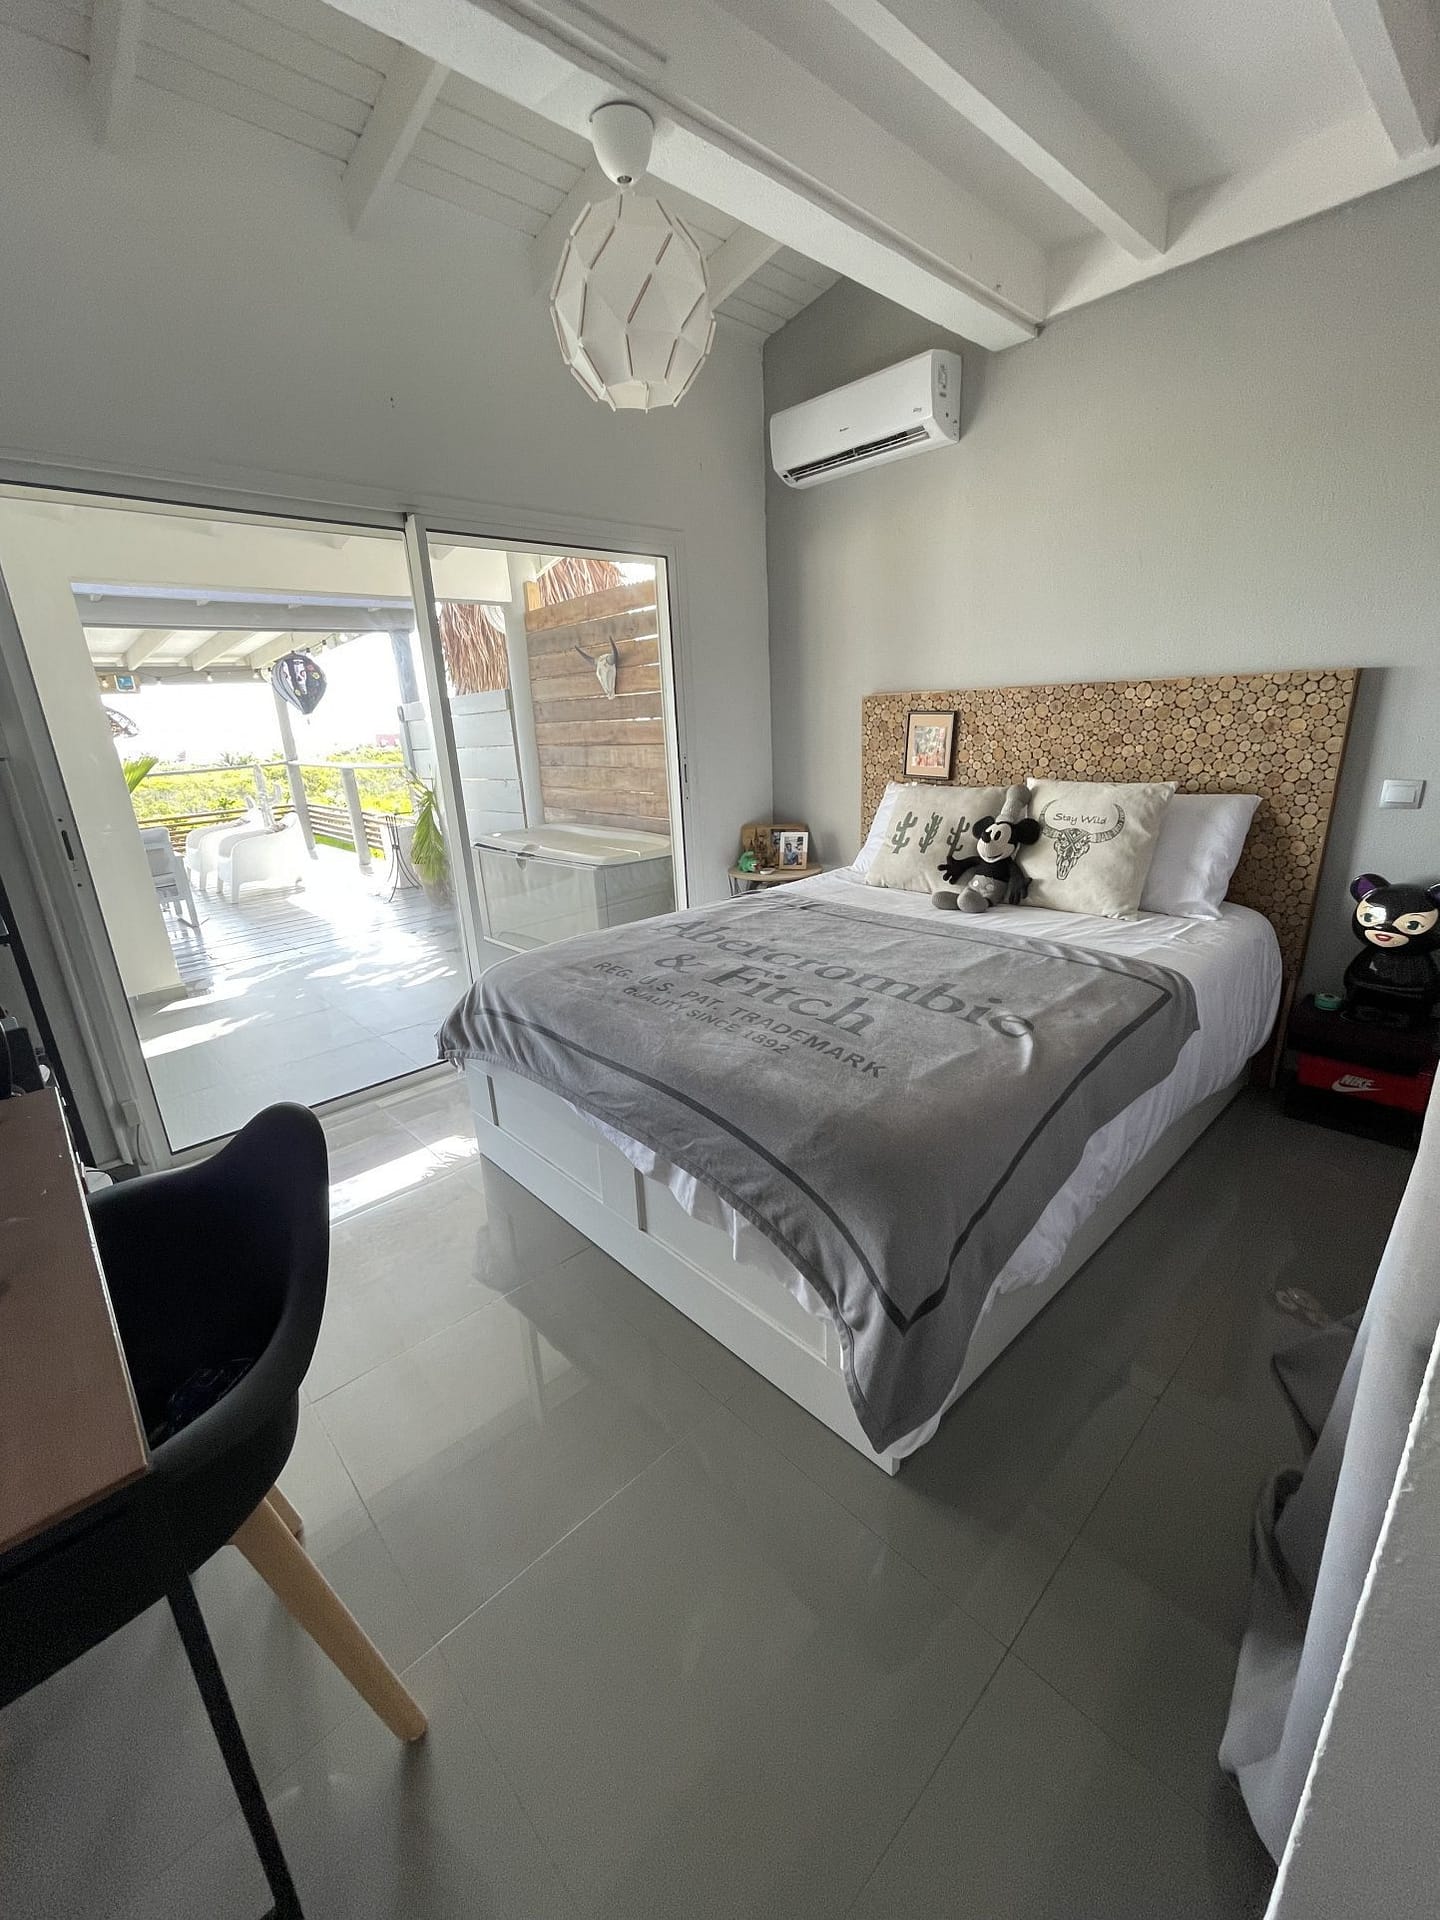 ORIENT BAY – Villa T4 with independent apartment